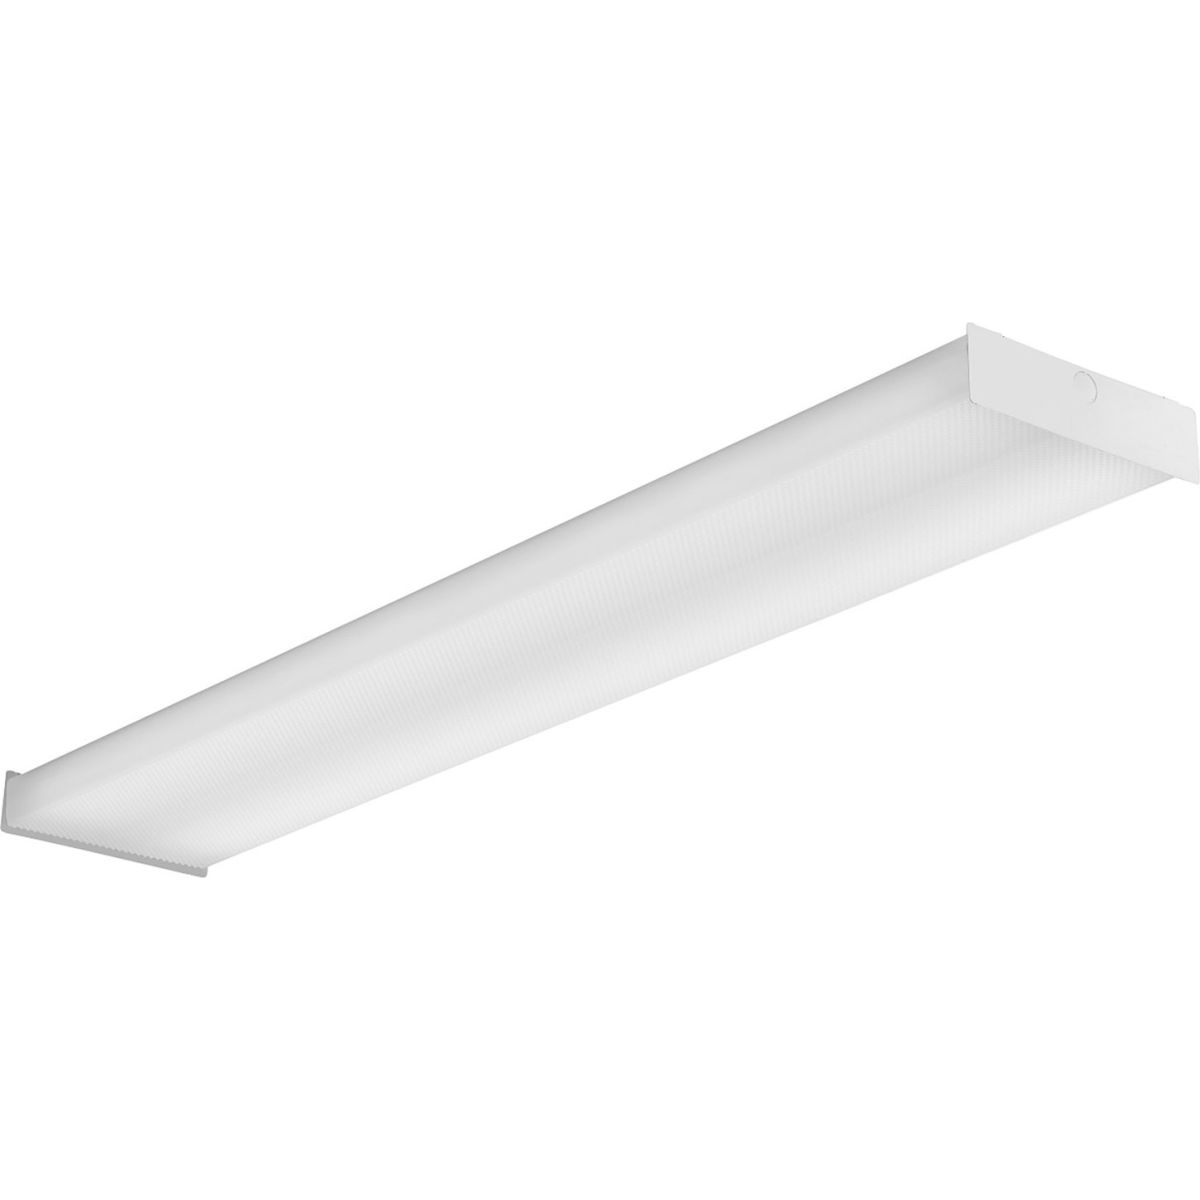 Picture of Acuity Brands B2052145 MVOLT 40L 4000 CCT Lithonia Lighting SBL4 LP840 4 ft. LED Square-Basket Wraparound